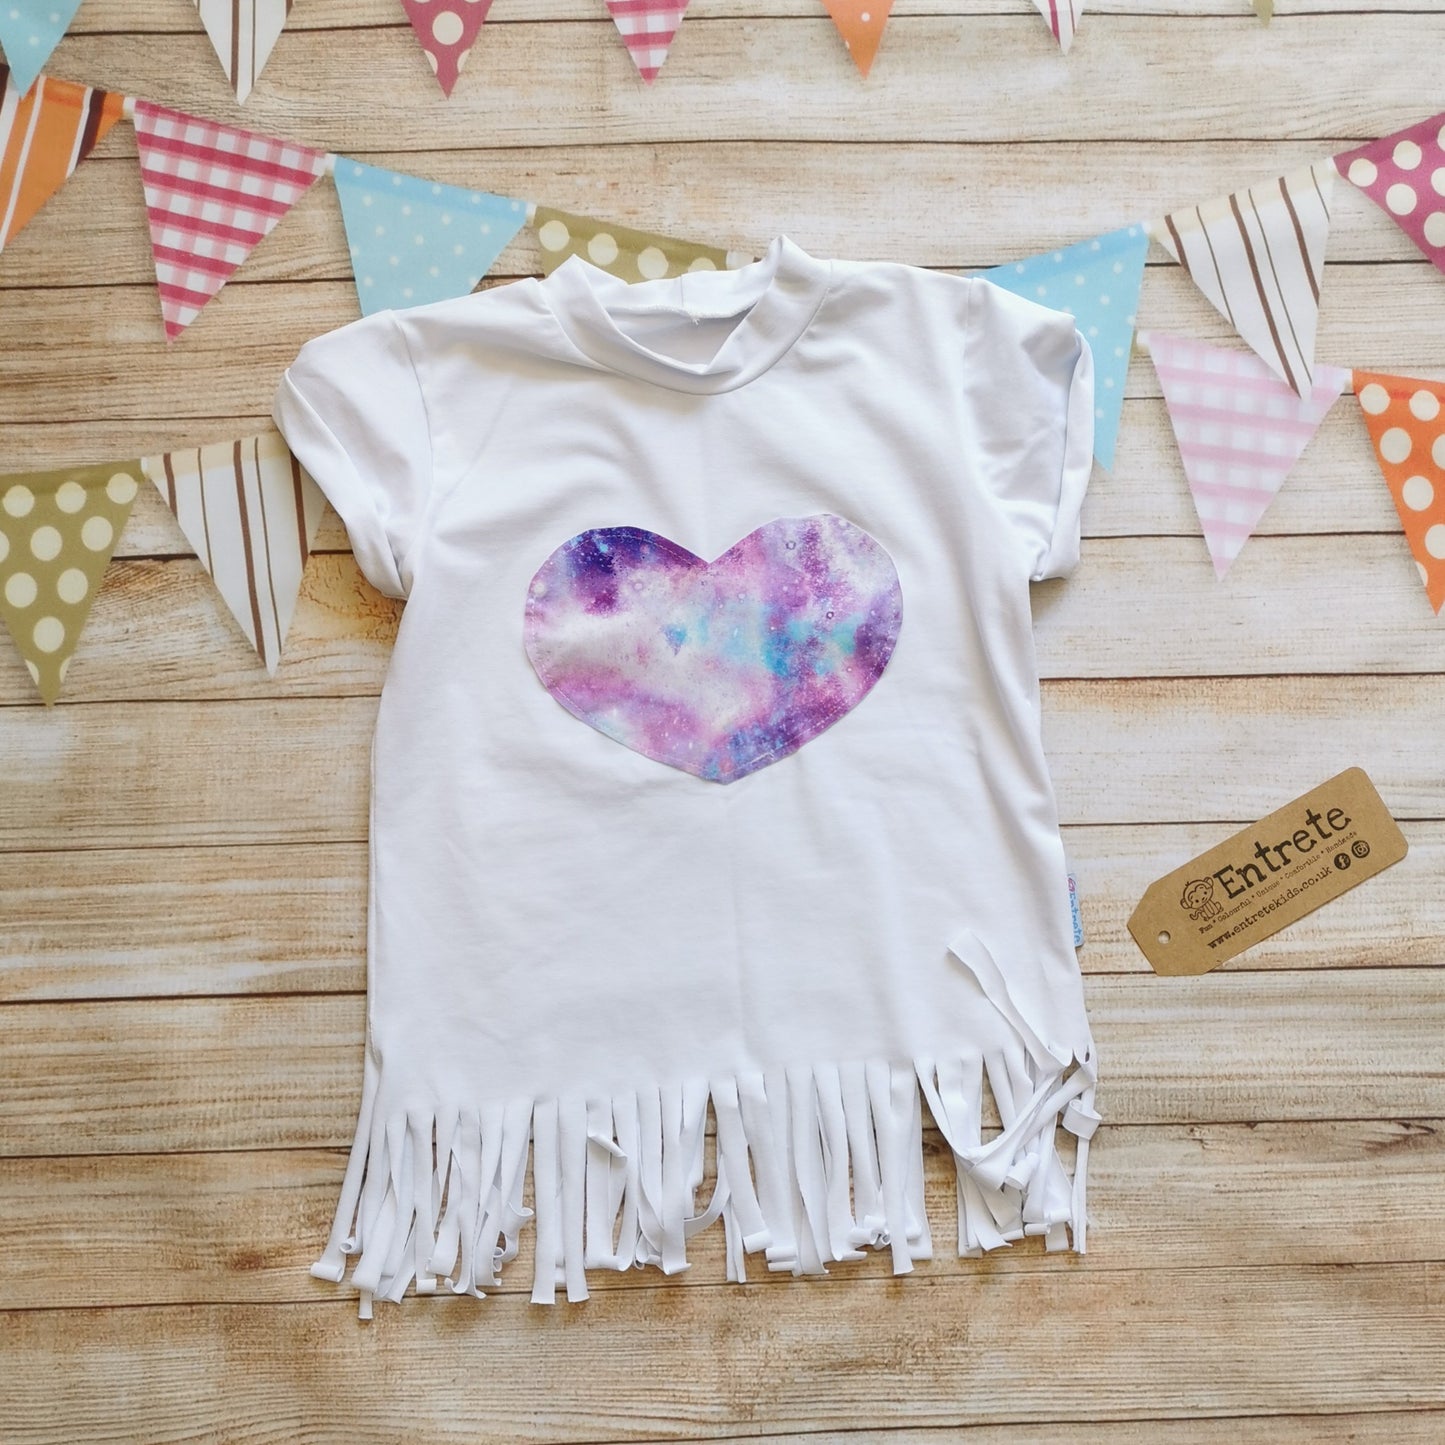 Girls tassel top, handmade using white cotton jersey and featuring a marbled galaxy cotton jersey heart. With  rolled sleeves and tassel finish.